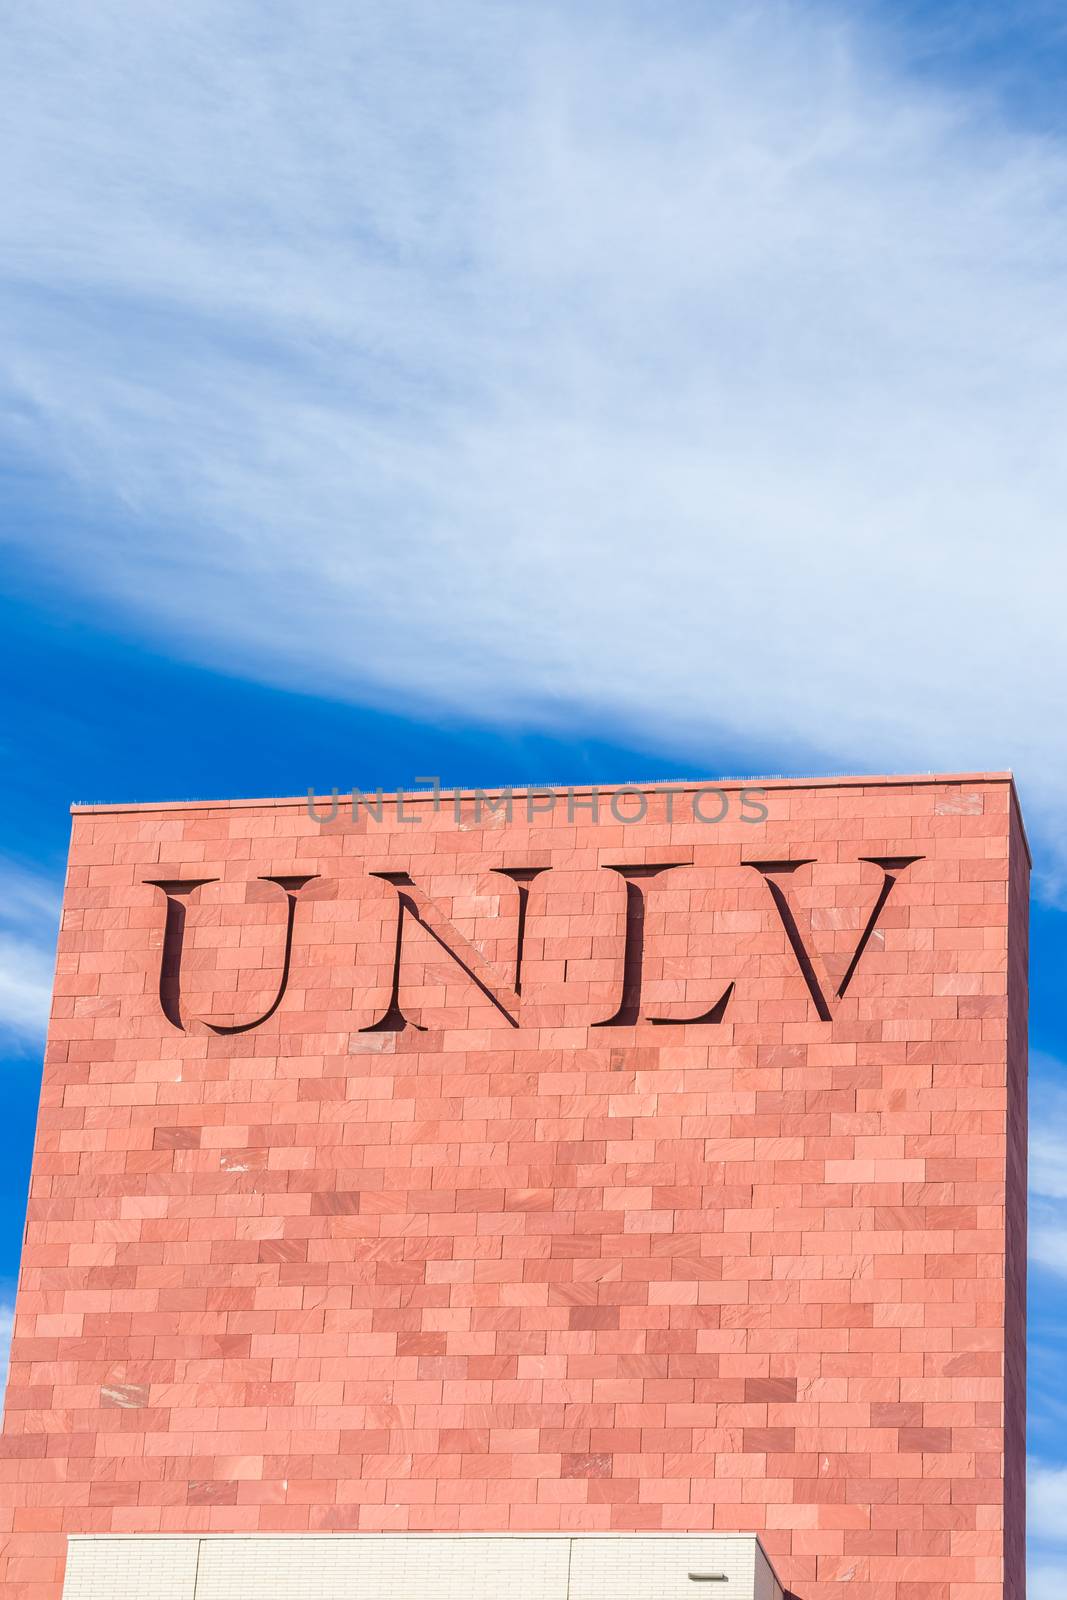 Campus Sign and Logo at the University of Nevada by wolterk